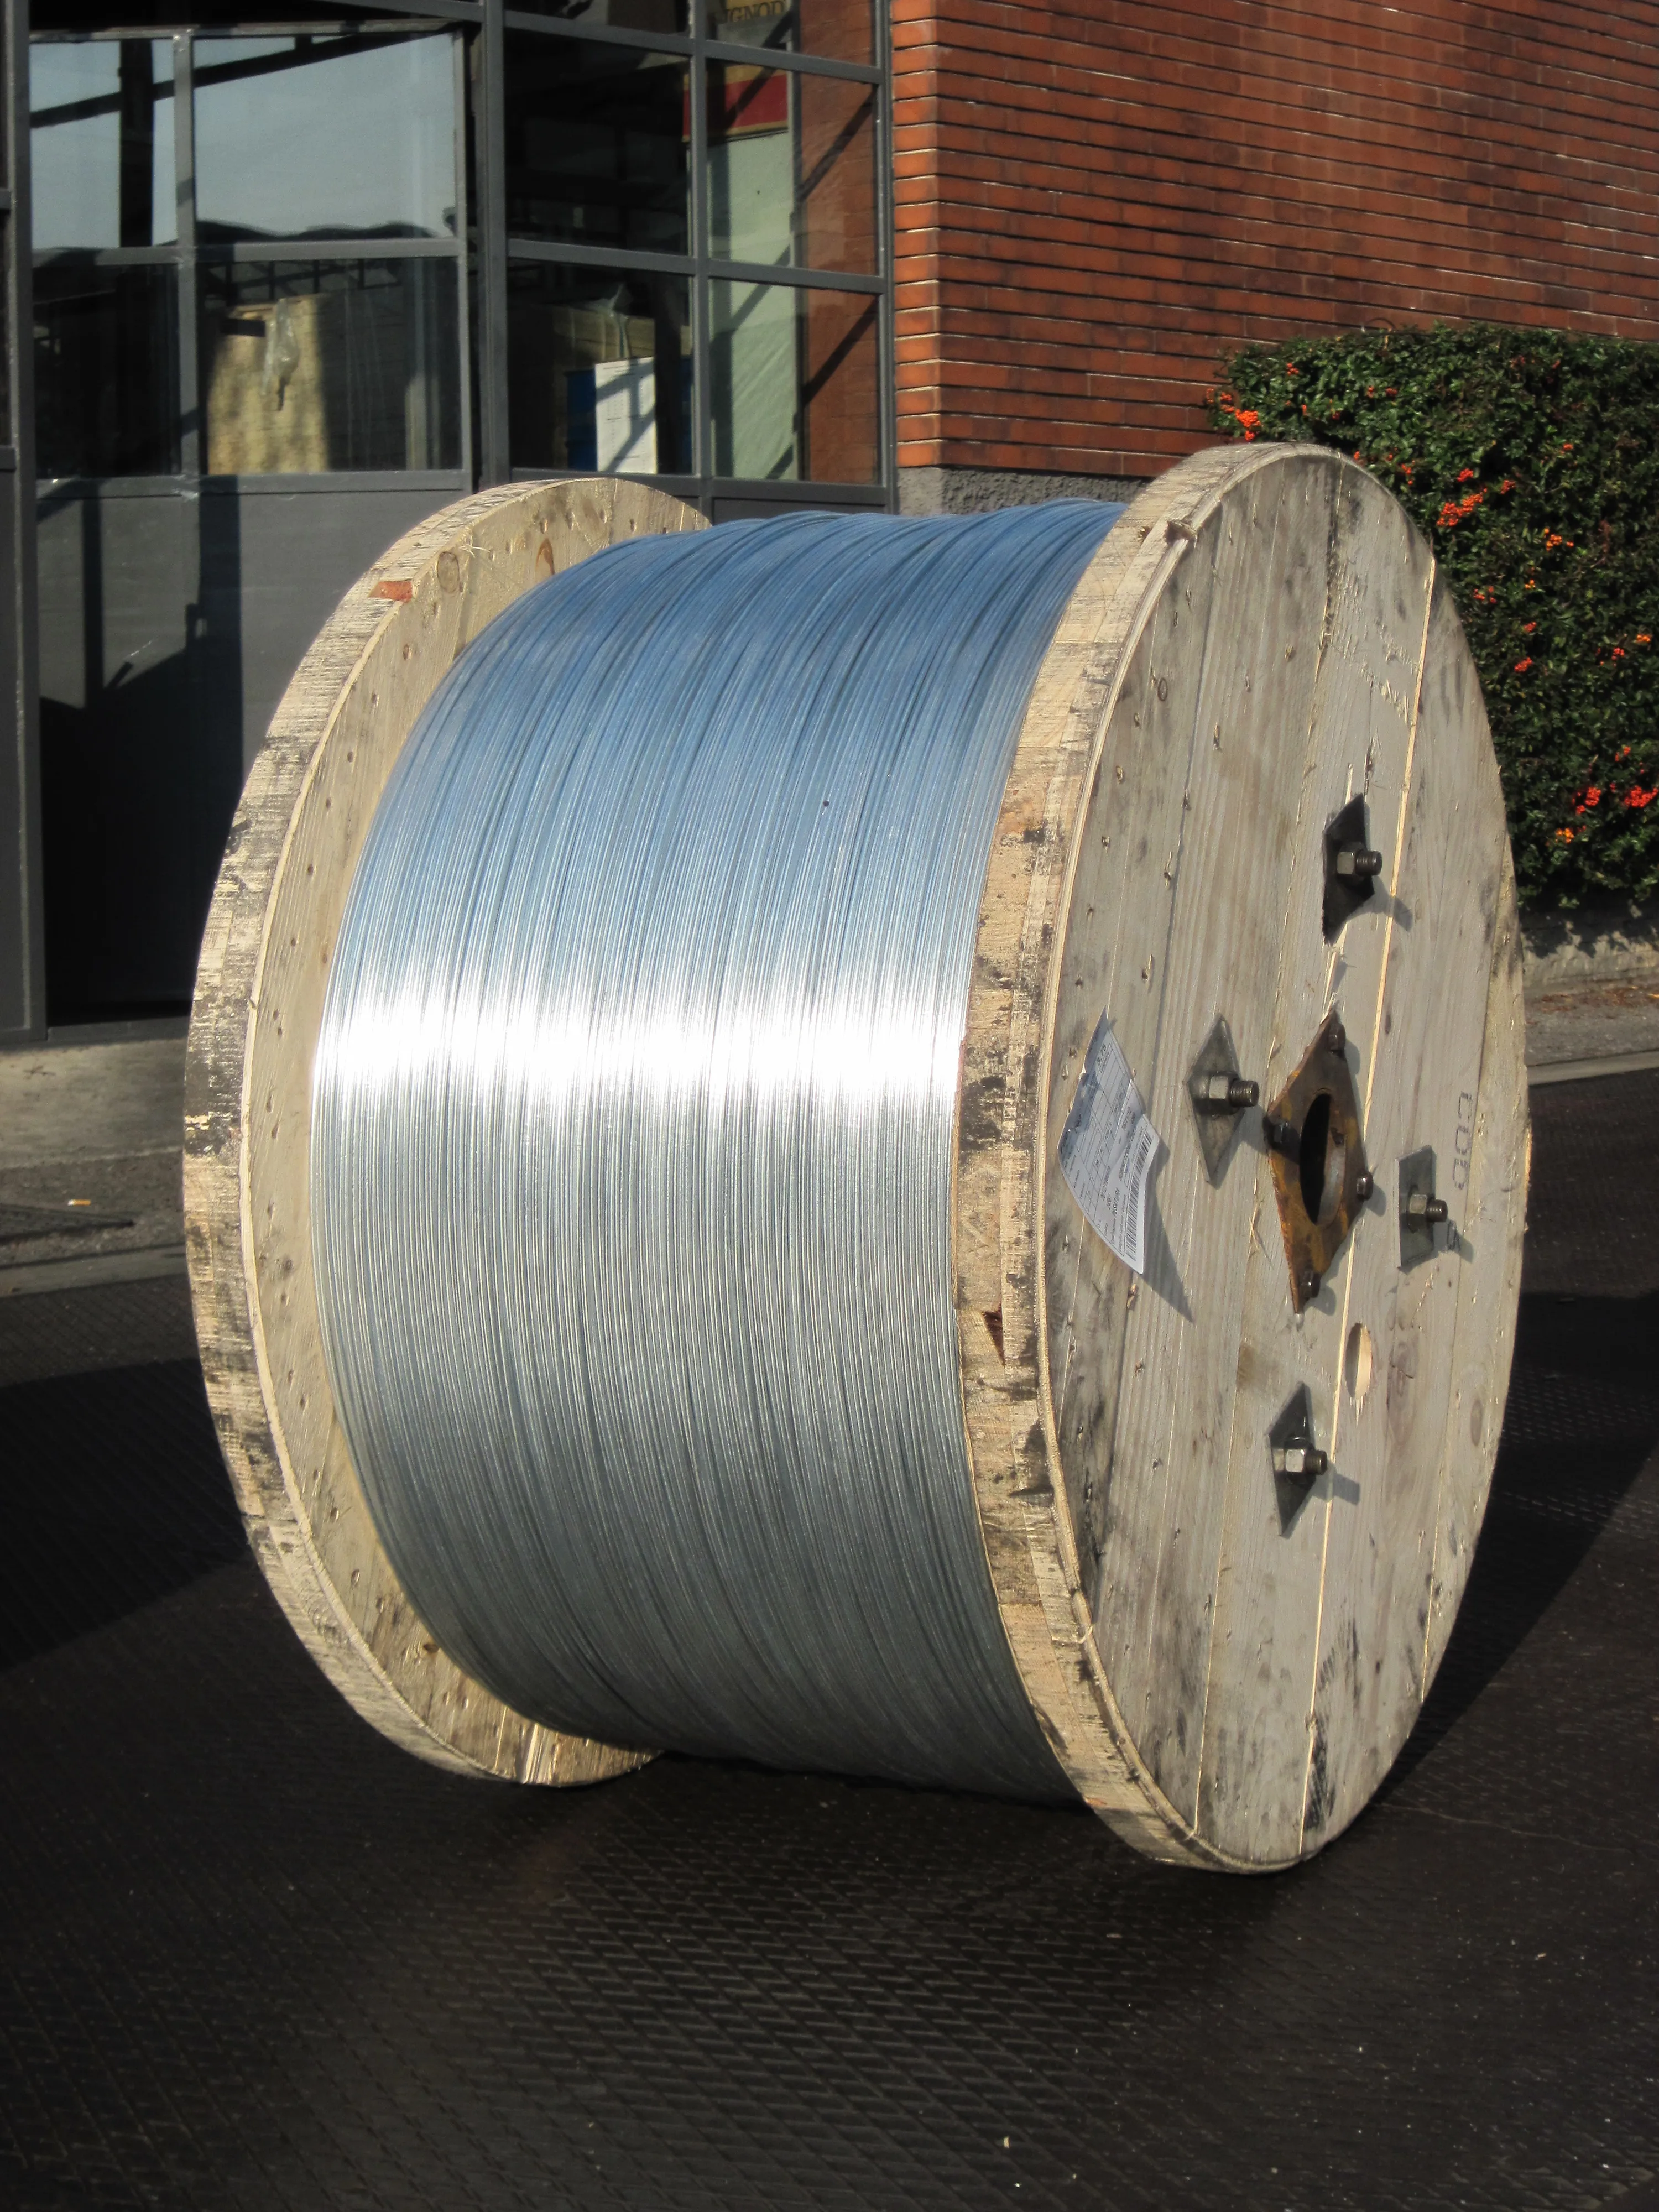 Top quality Italian zinc-alu steel wire diam. 4.00 mm for orchards